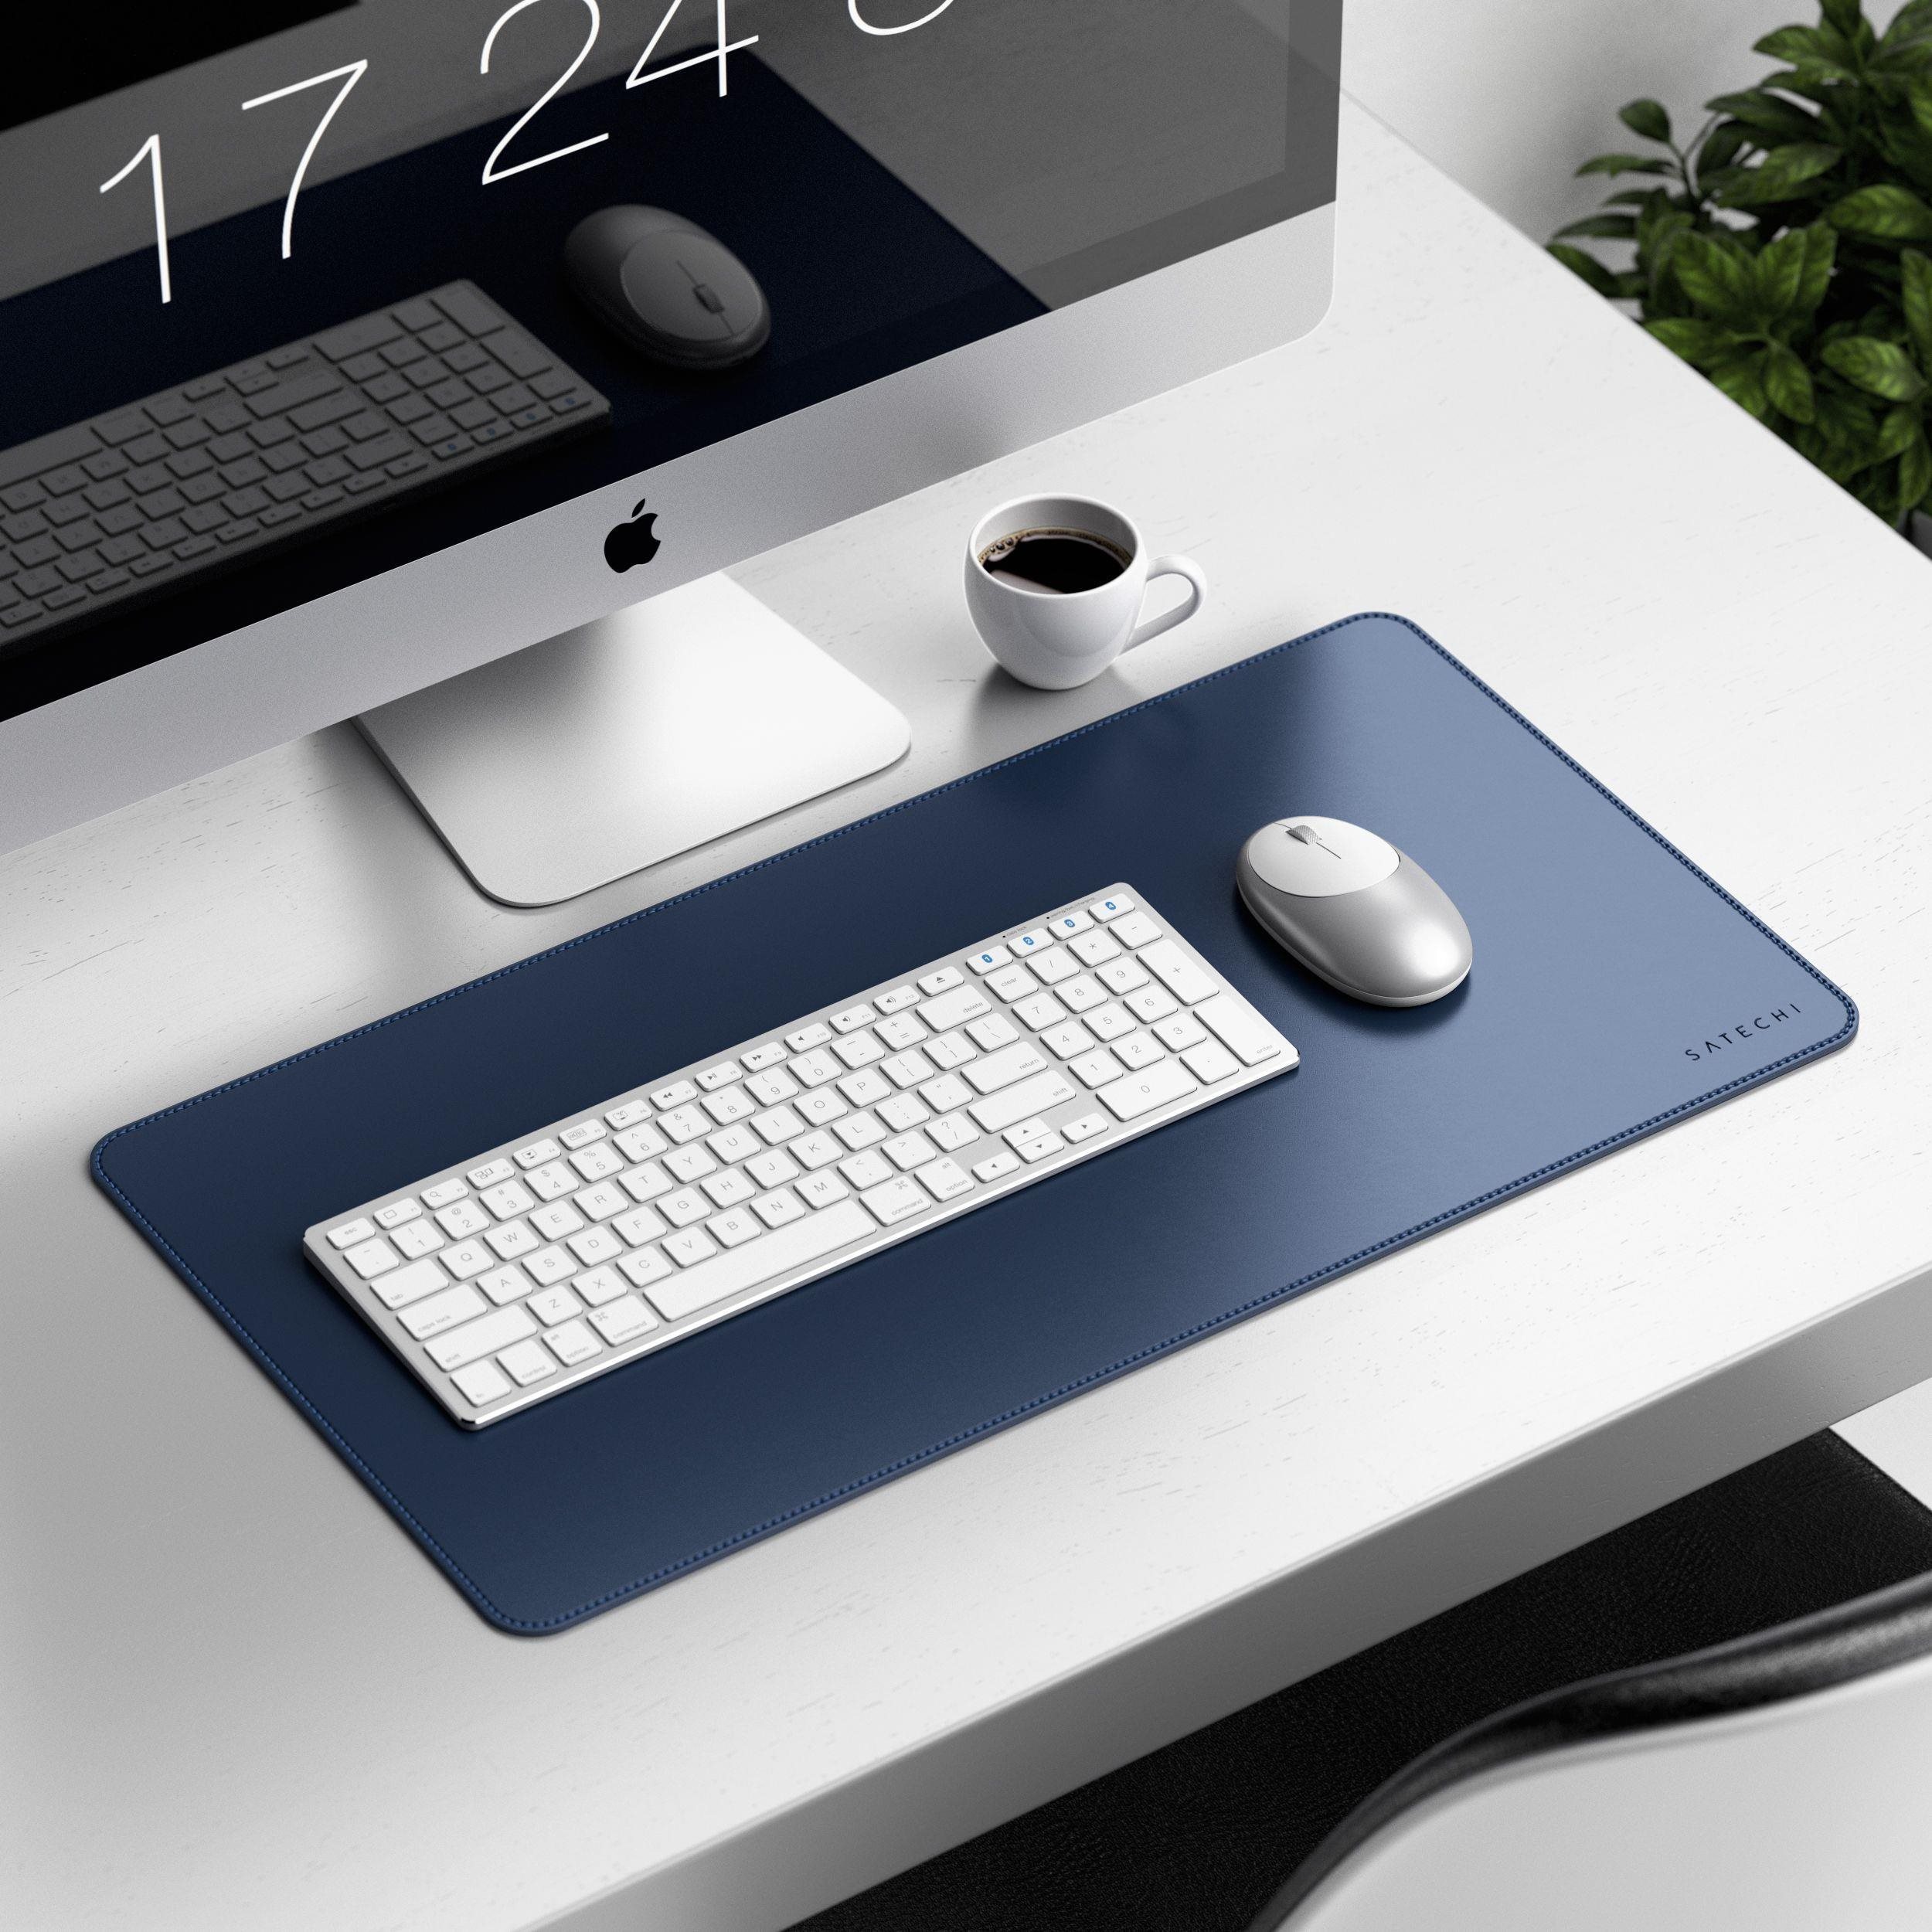 Mouse Pad Satechi Eco Leather DeskMate - Blue Lifestyle